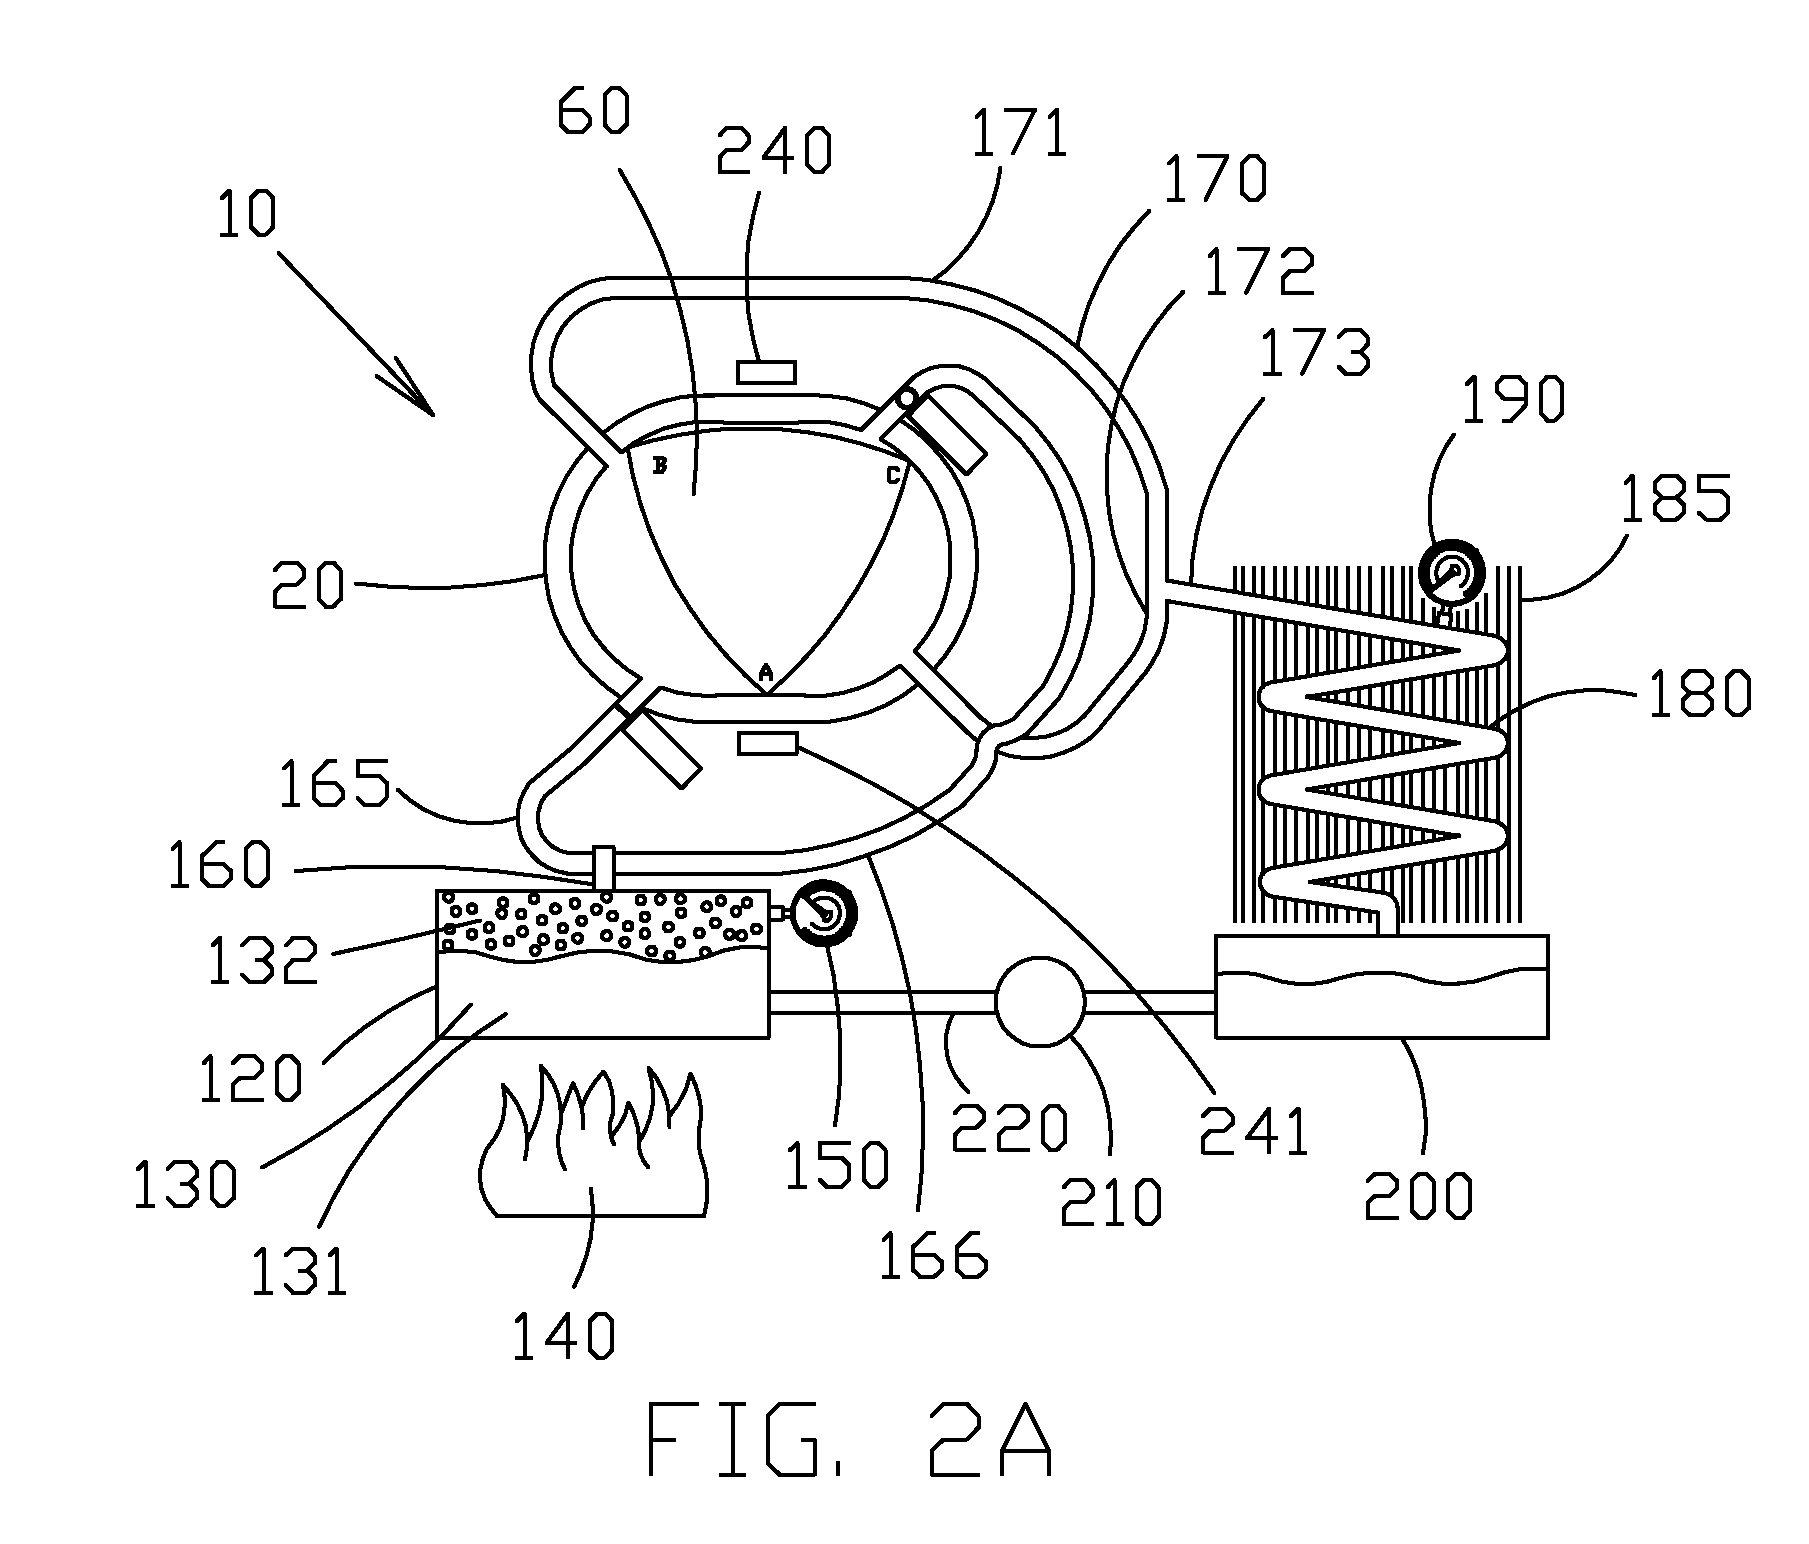 Heat engine with linear actuators